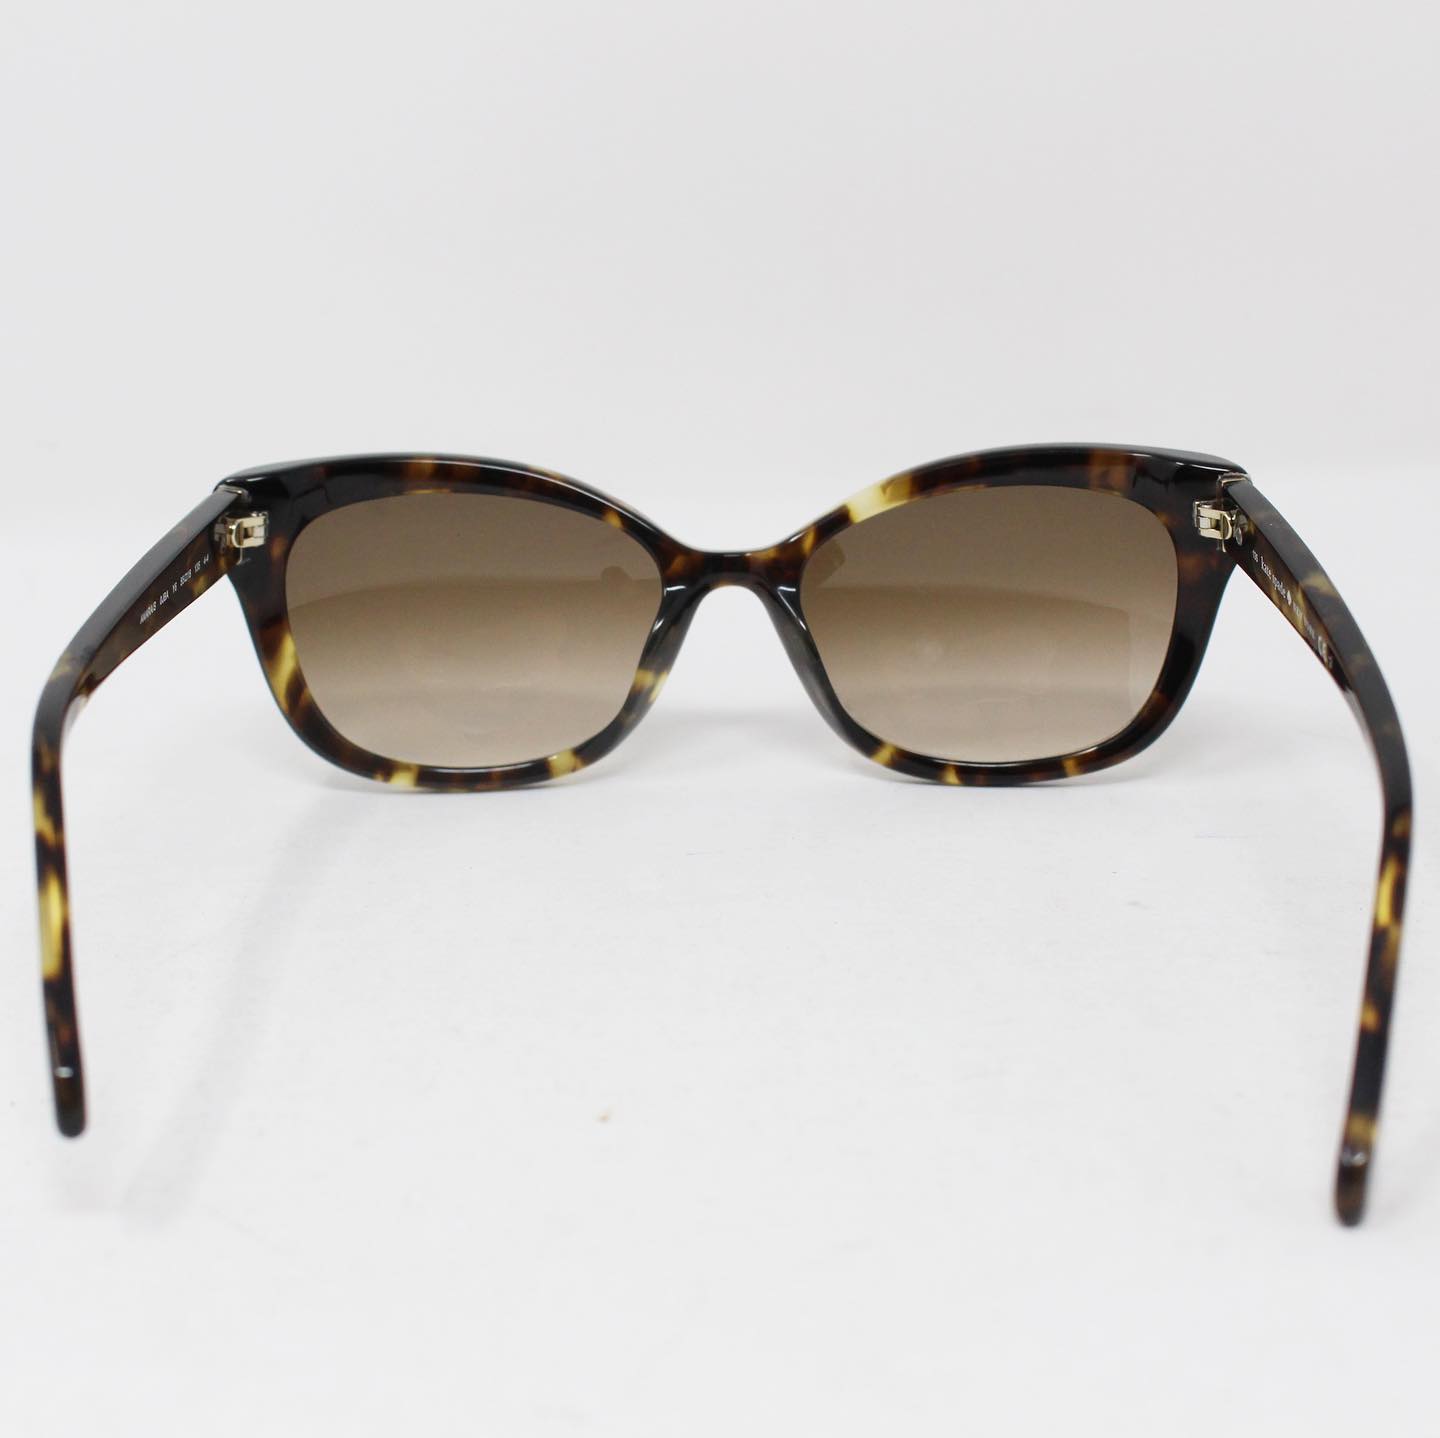 KATE SPADE Brown Tortoise Sunglasses #28115 – ALL YOUR BLISS